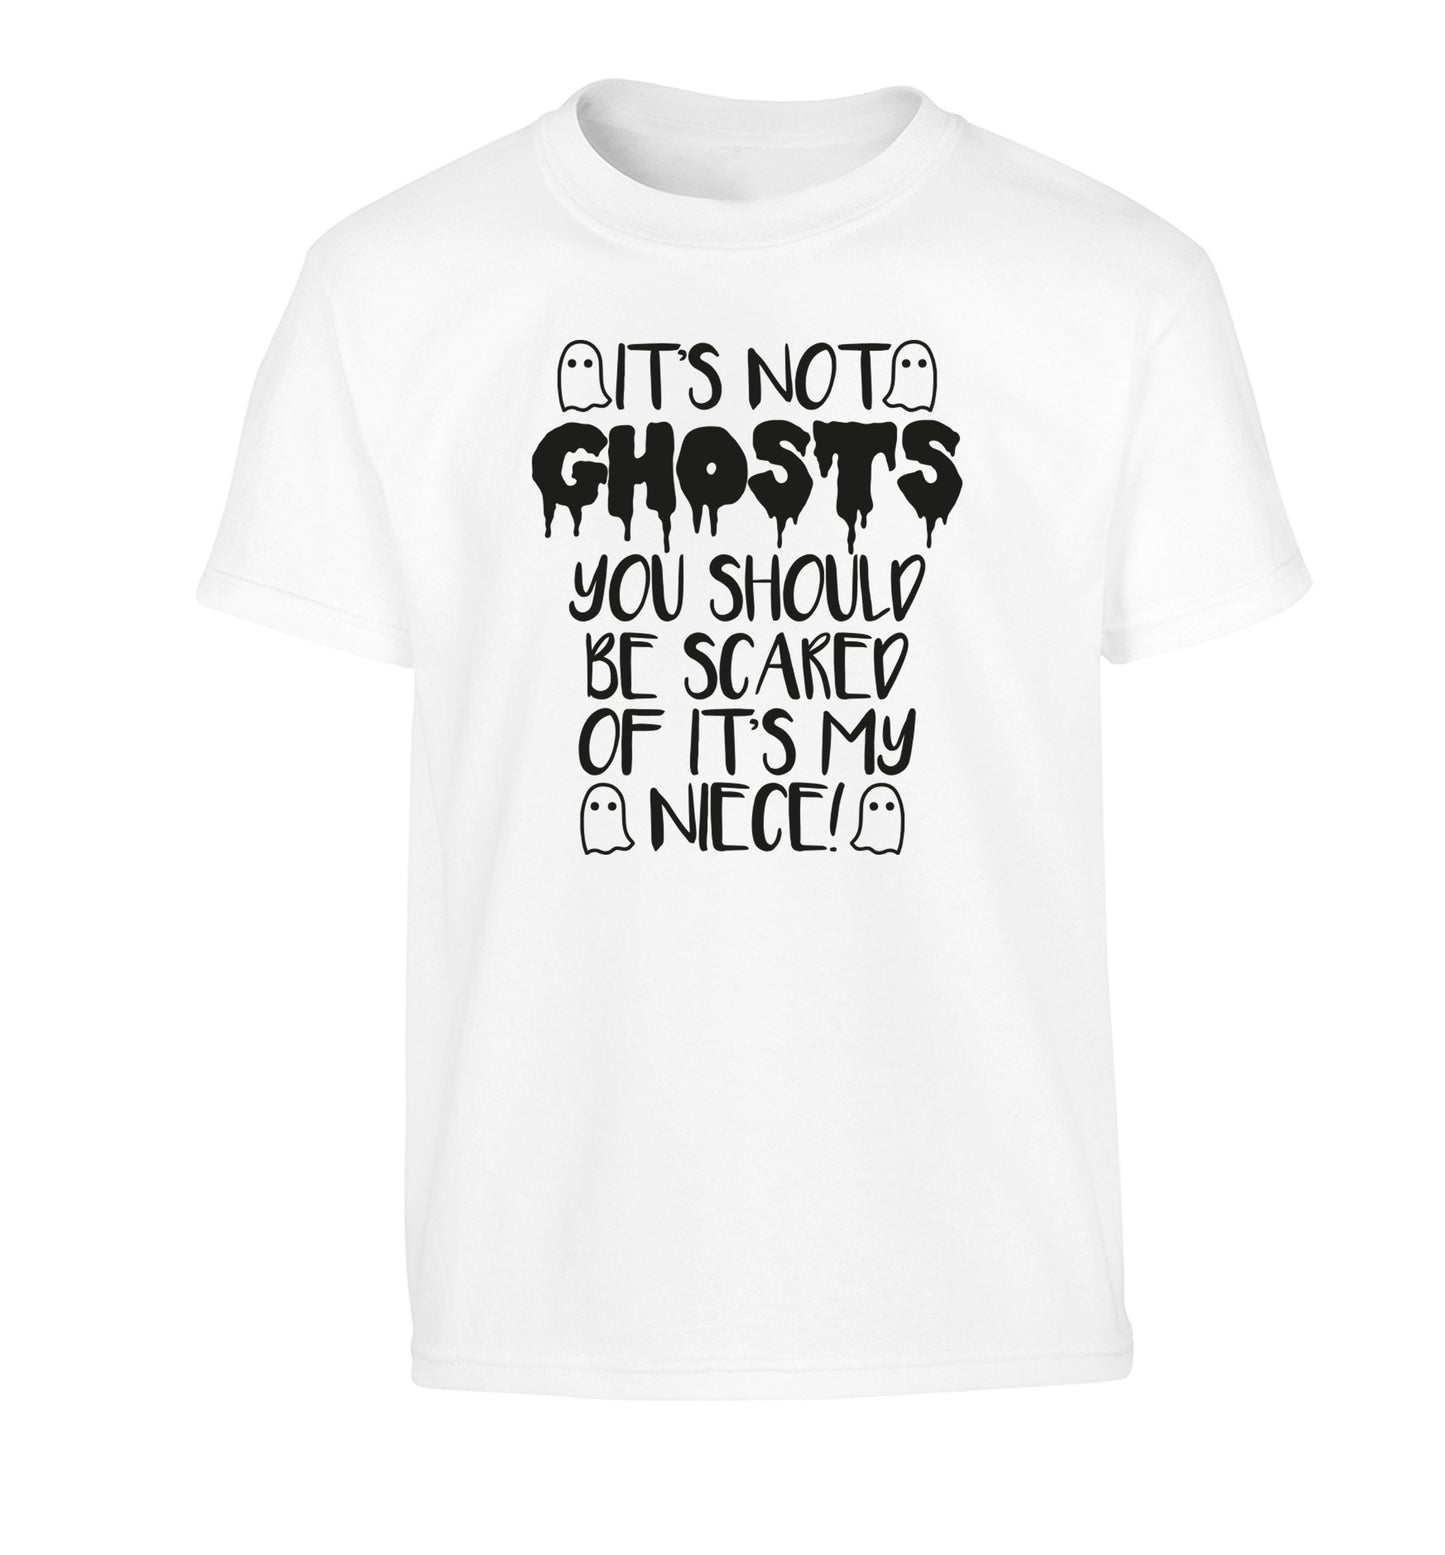 It's not ghosts you should be scared of it's my niece! Children's white Tshirt 12-14 Years